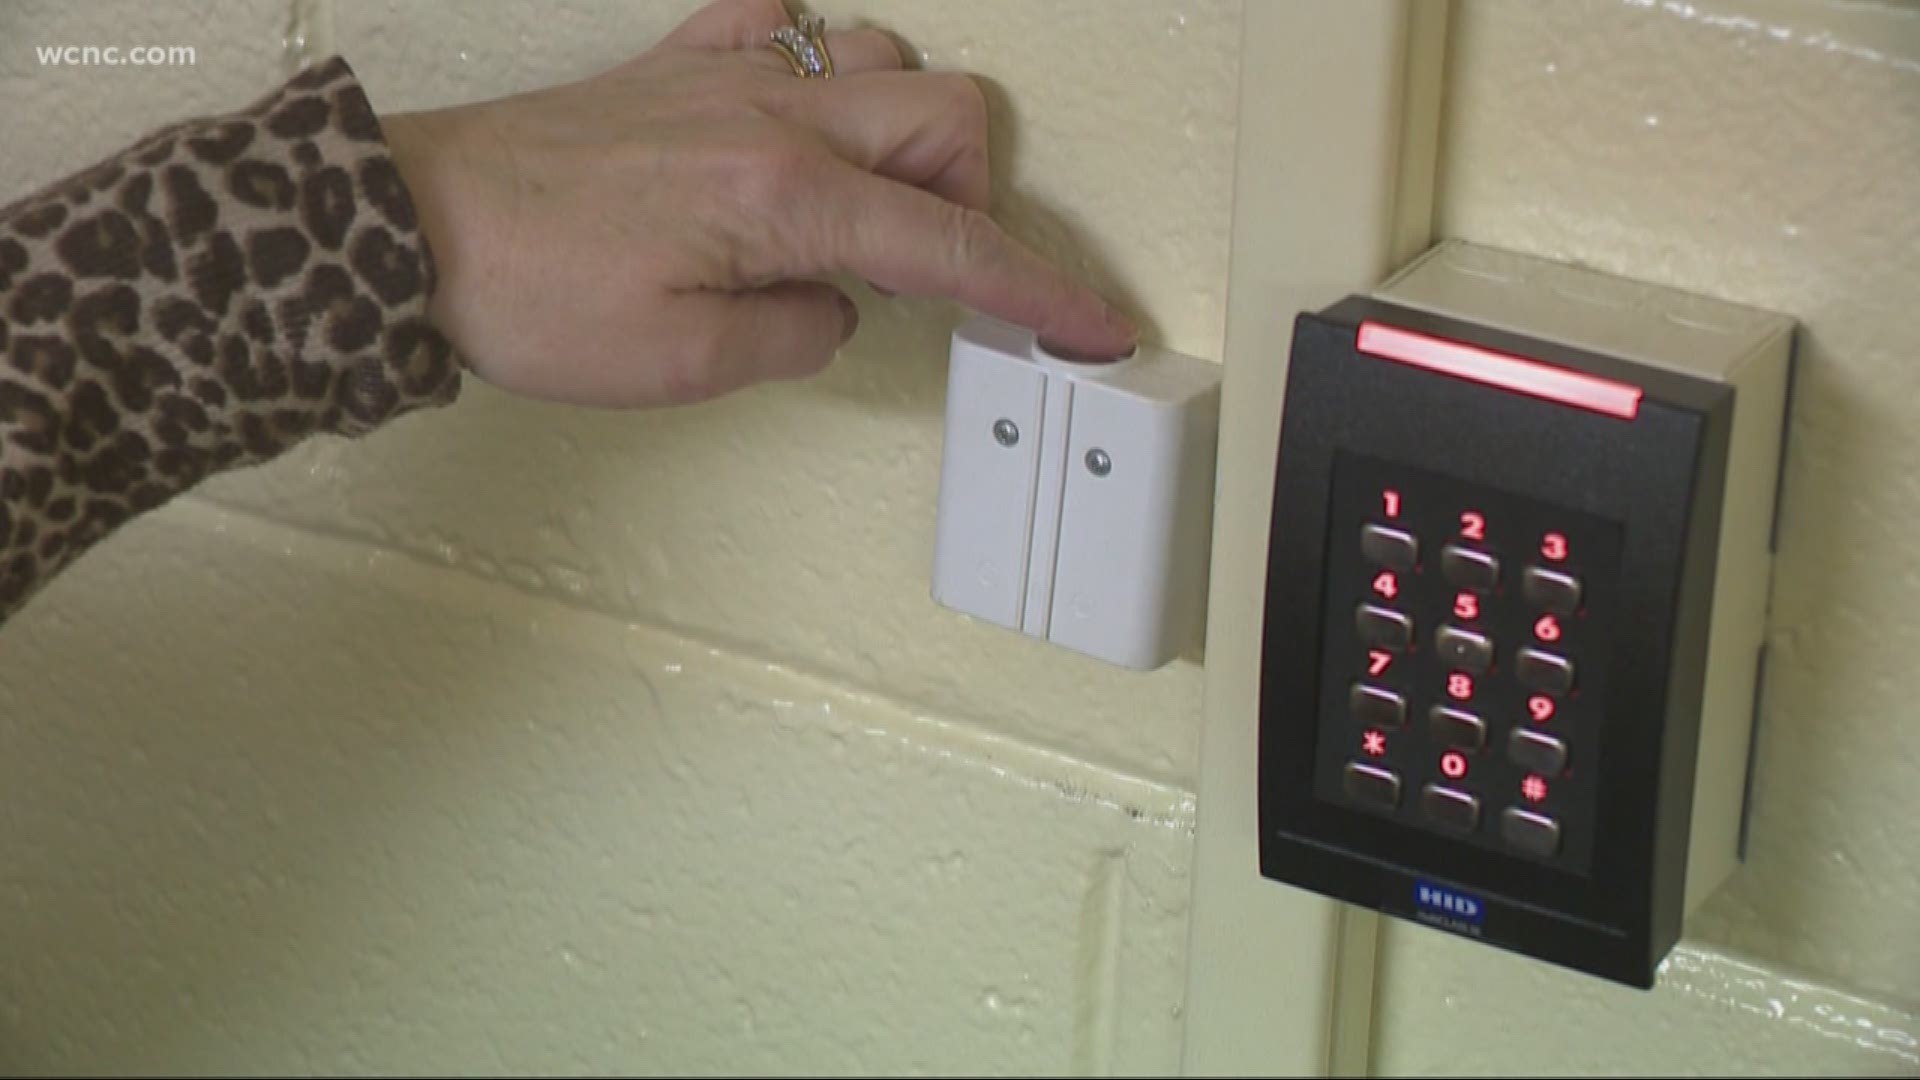 A local school district adds a lockdown button to keep students safe.